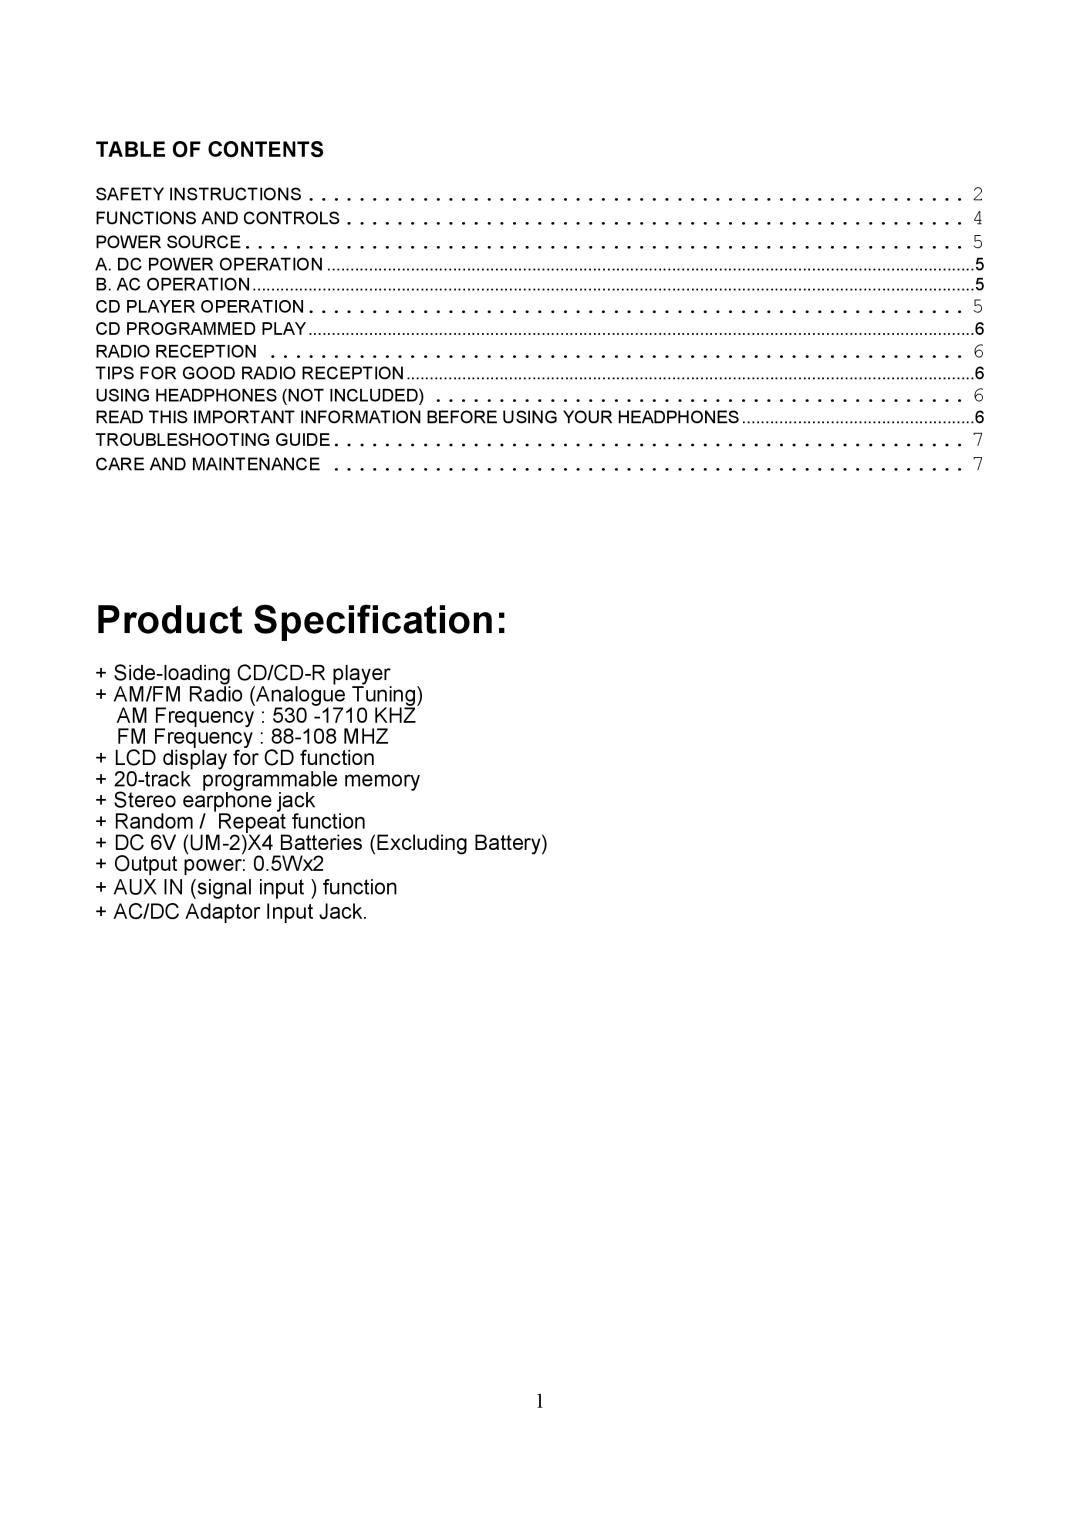 Curtis RCD224UK operating instructions Table Of Contents, Product Specification 